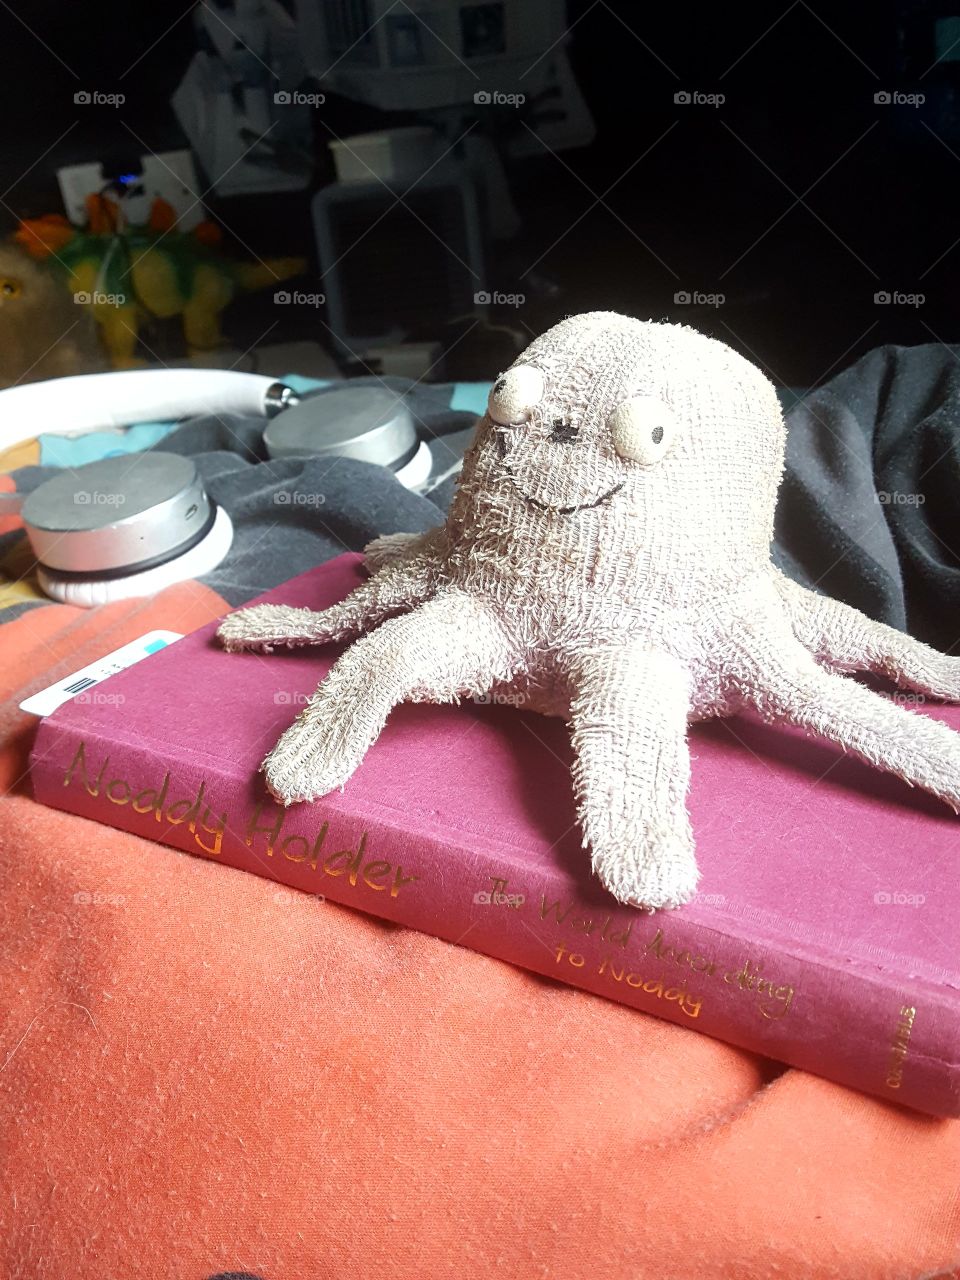 Mr Purple Octopus is reading a hard book (remember to not be on your phone to long)